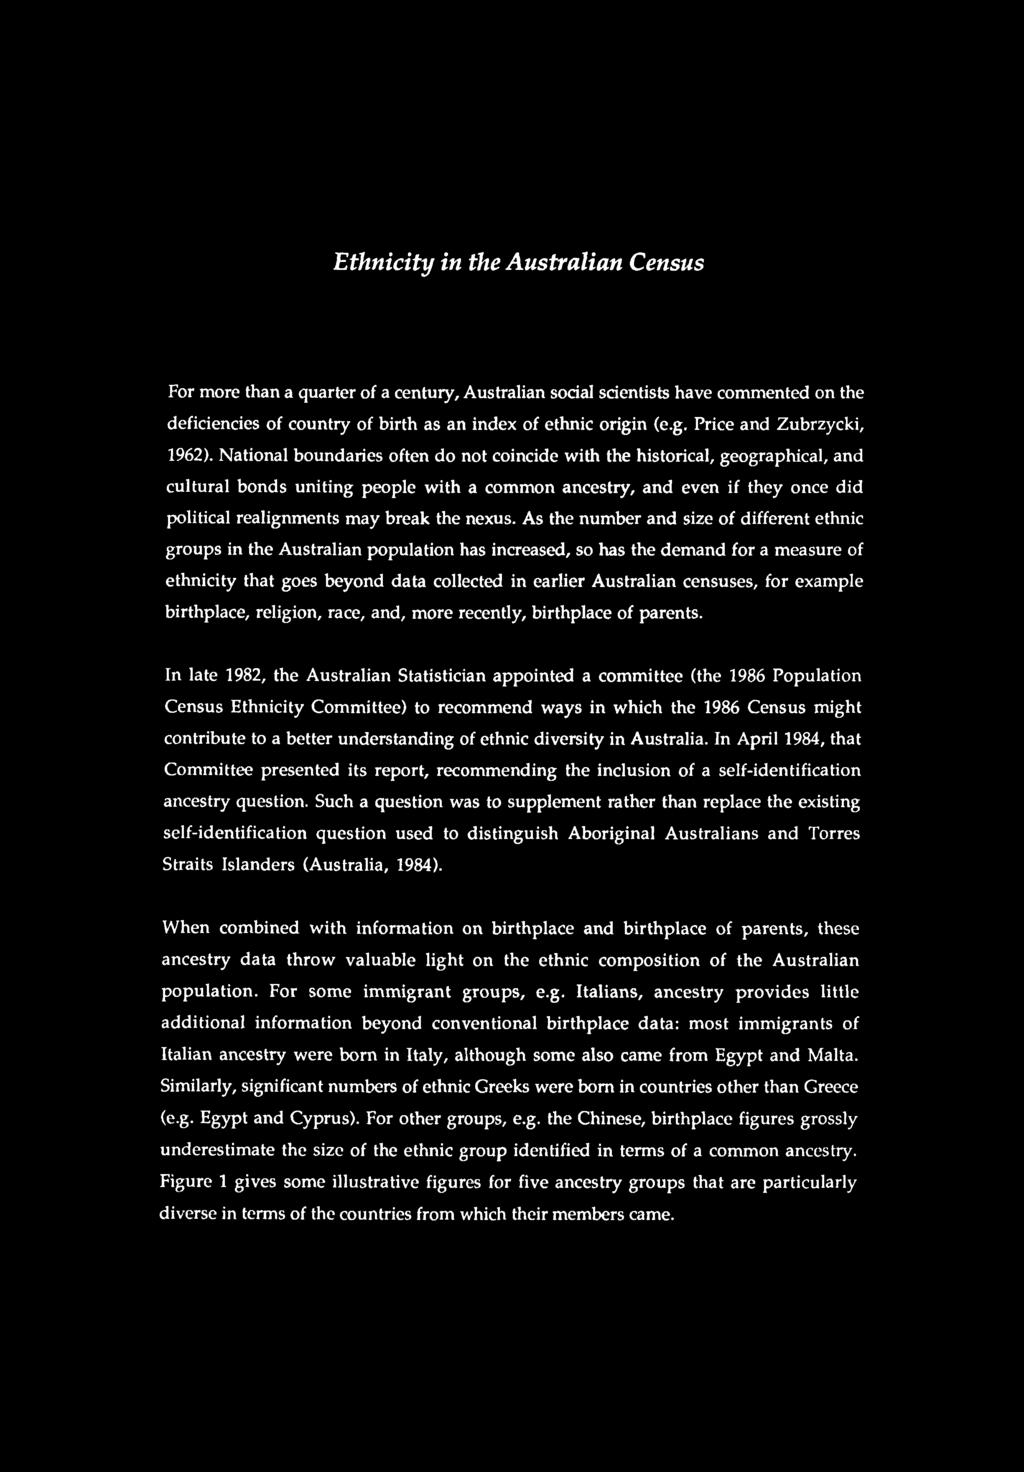 Ethnicity in the Australian Census For more than a quarter of a centuiy, Australian social scientists have commented on the deficiencies of country of birth as an index of ethnic origi